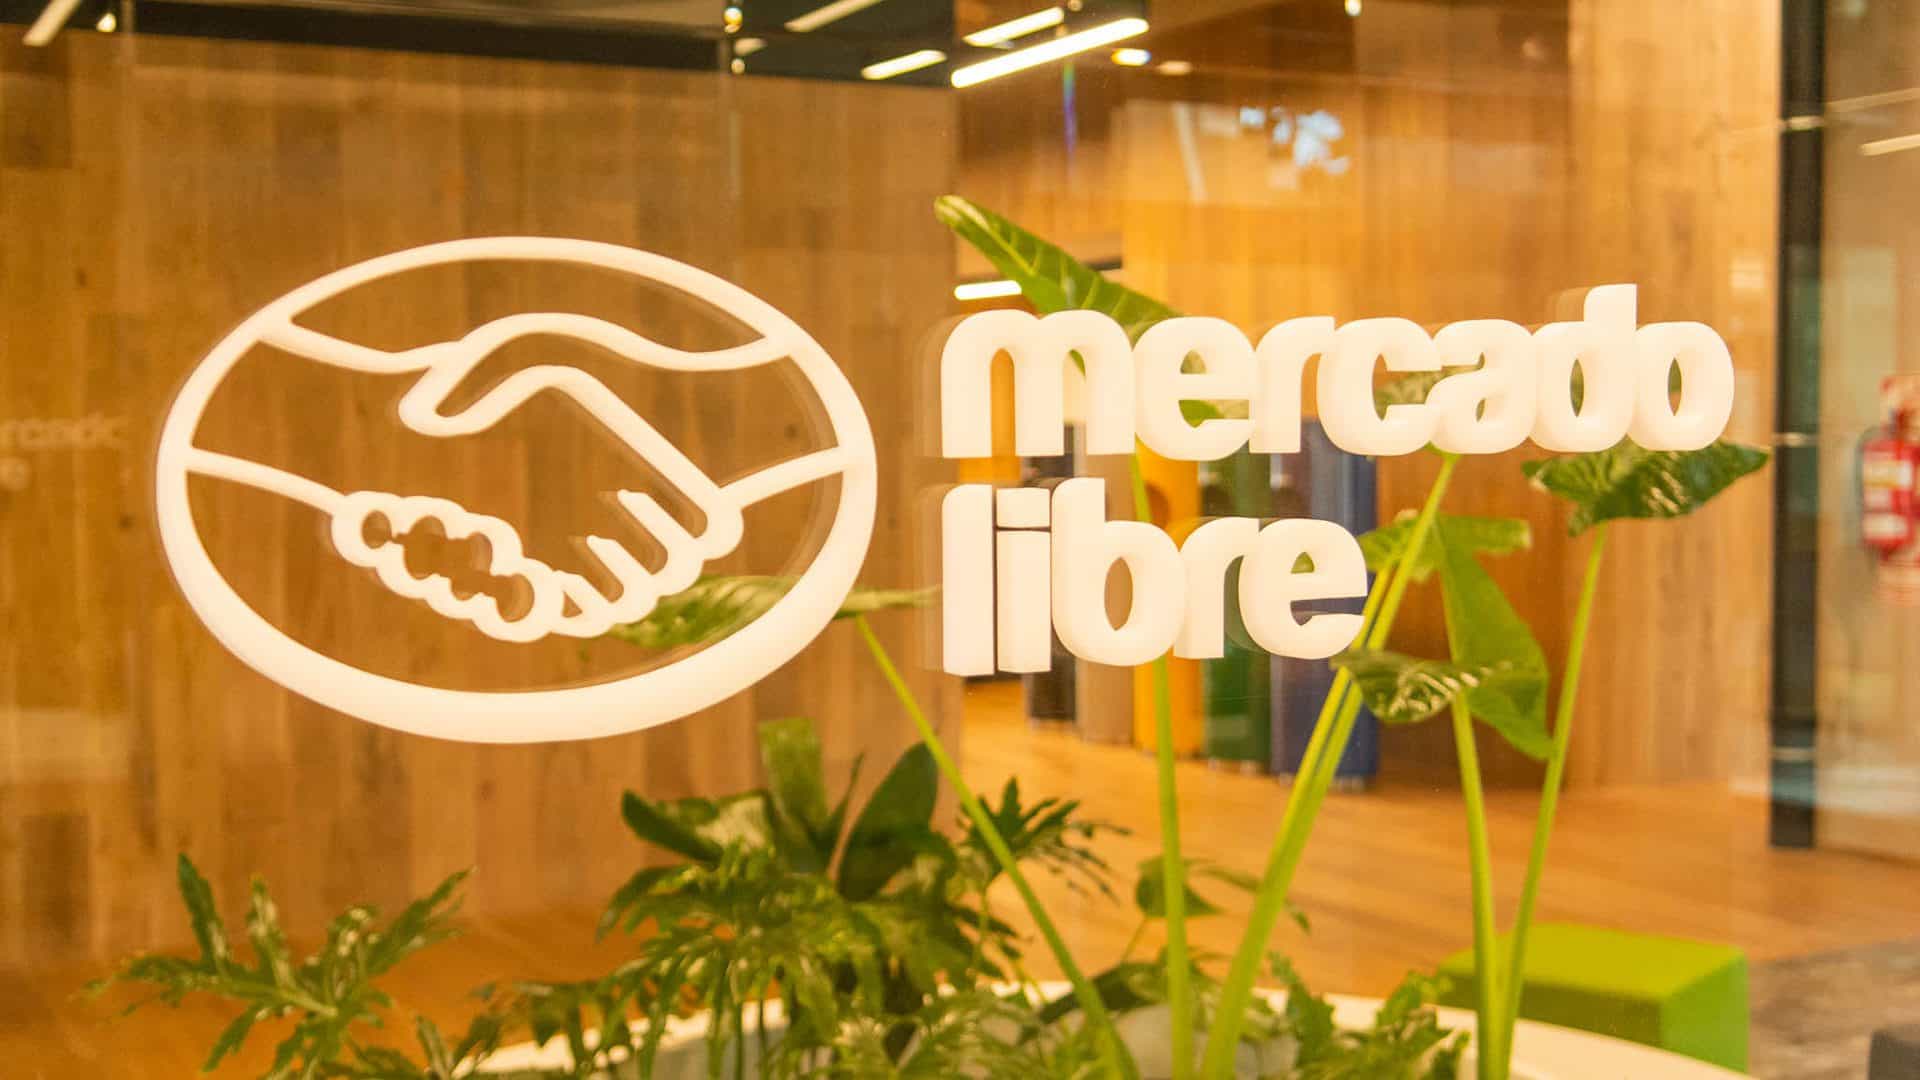 Mercado Libre employs technologies such as artificial intelligence (AI) and machine learning (ML) to combat irregularities on its platform.